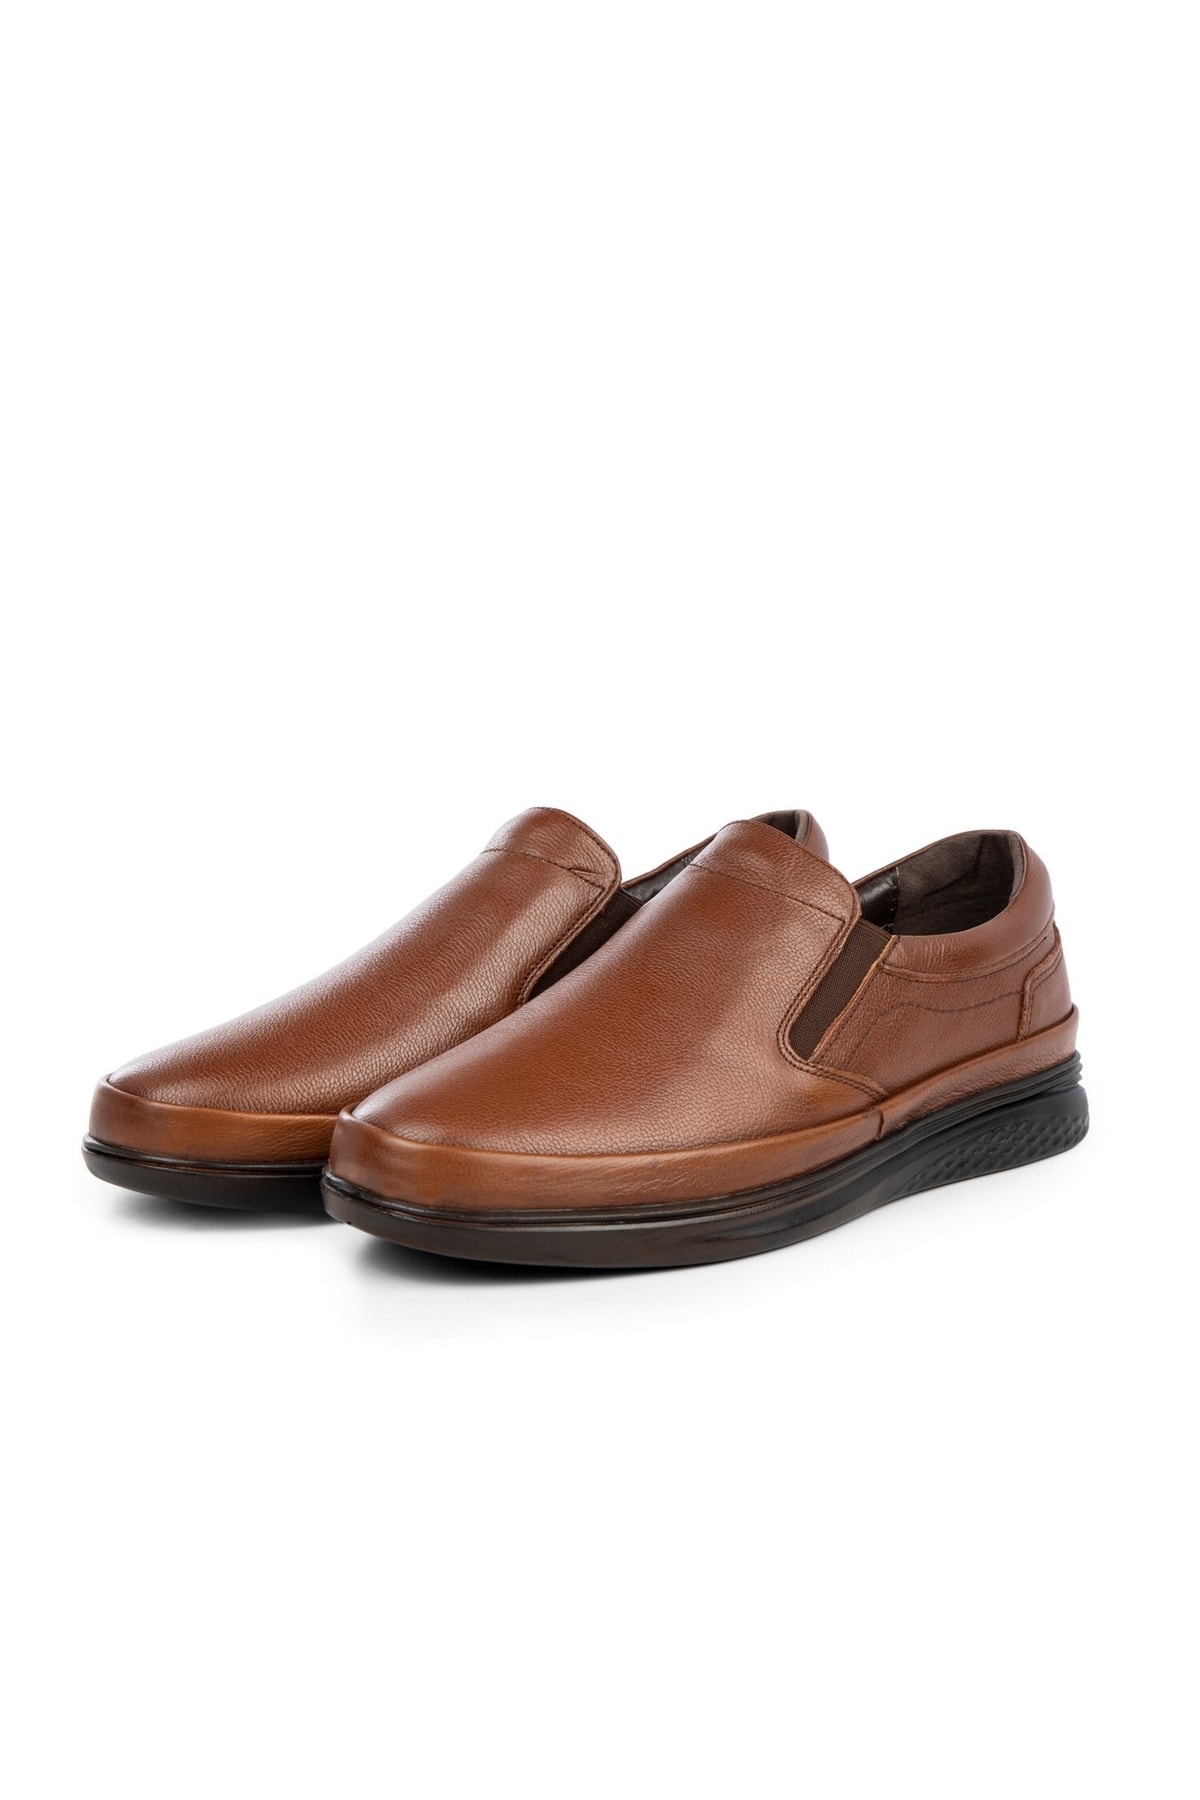 Levně Ducavelli Murih Genuine Leather Comfort Men's Orthopedic Casual Shoes, Dad Shoes, Orthopedic Shoes.